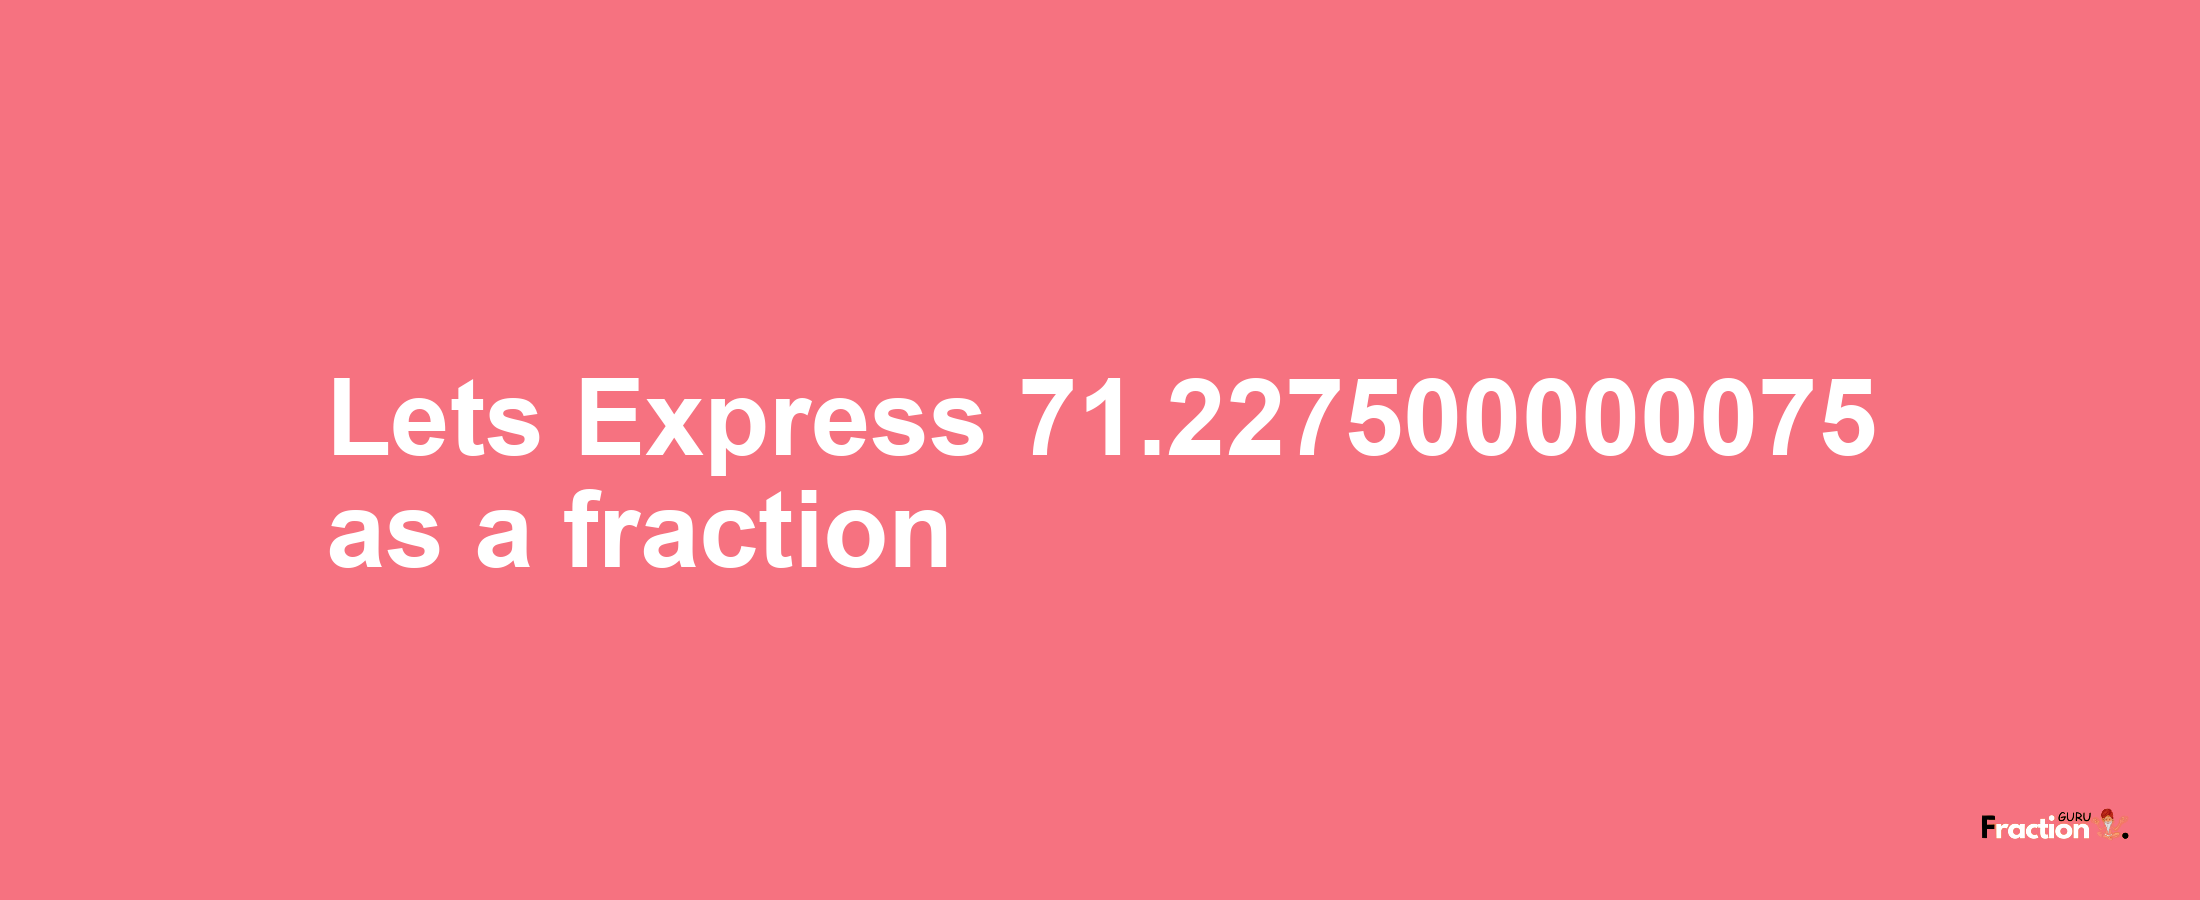 Lets Express 71.227500000075 as afraction